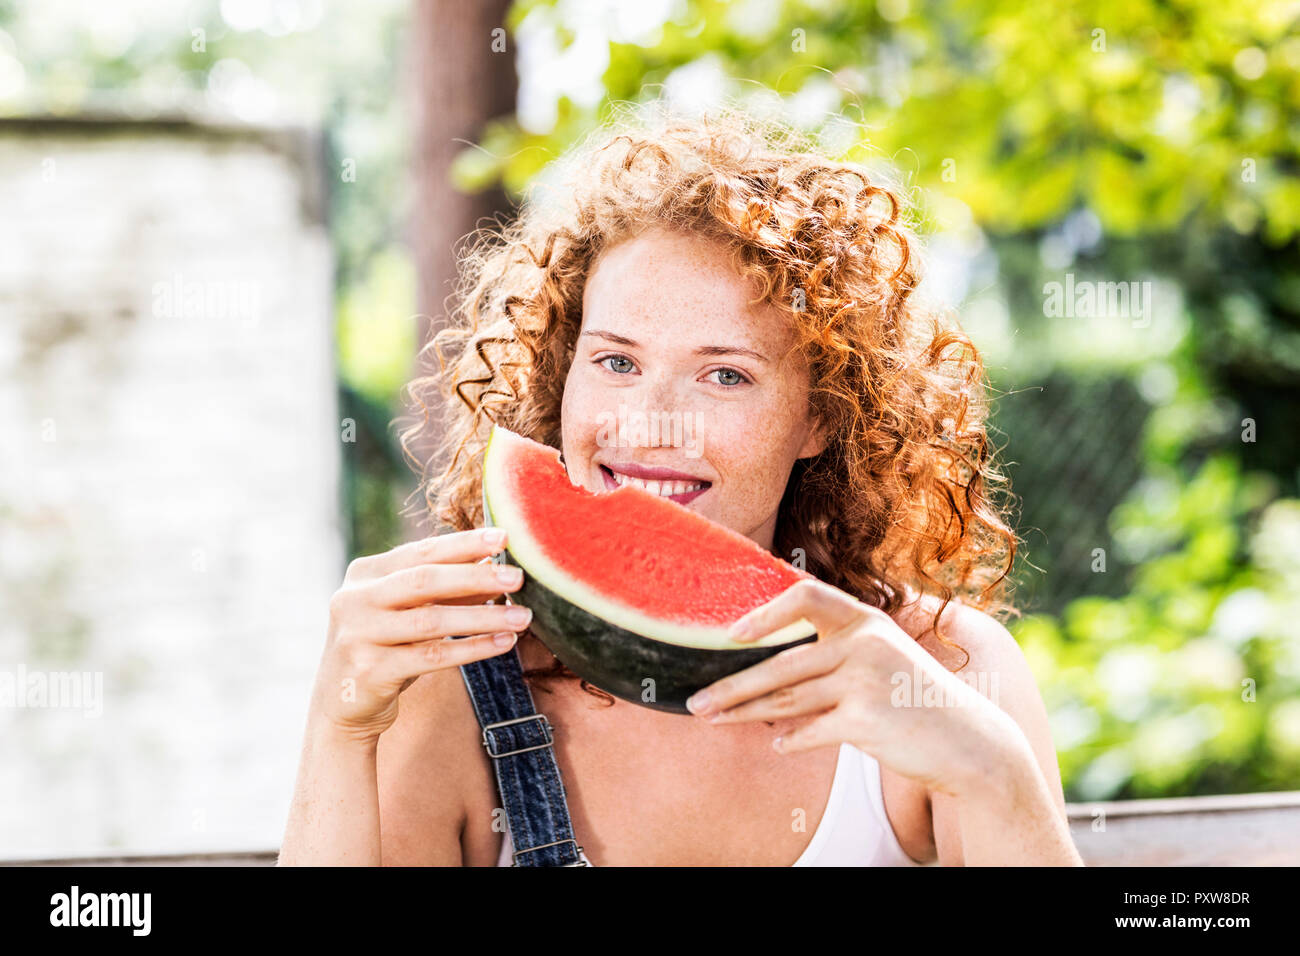 Portrait of redheaded young woman with watermelon Stock Photo